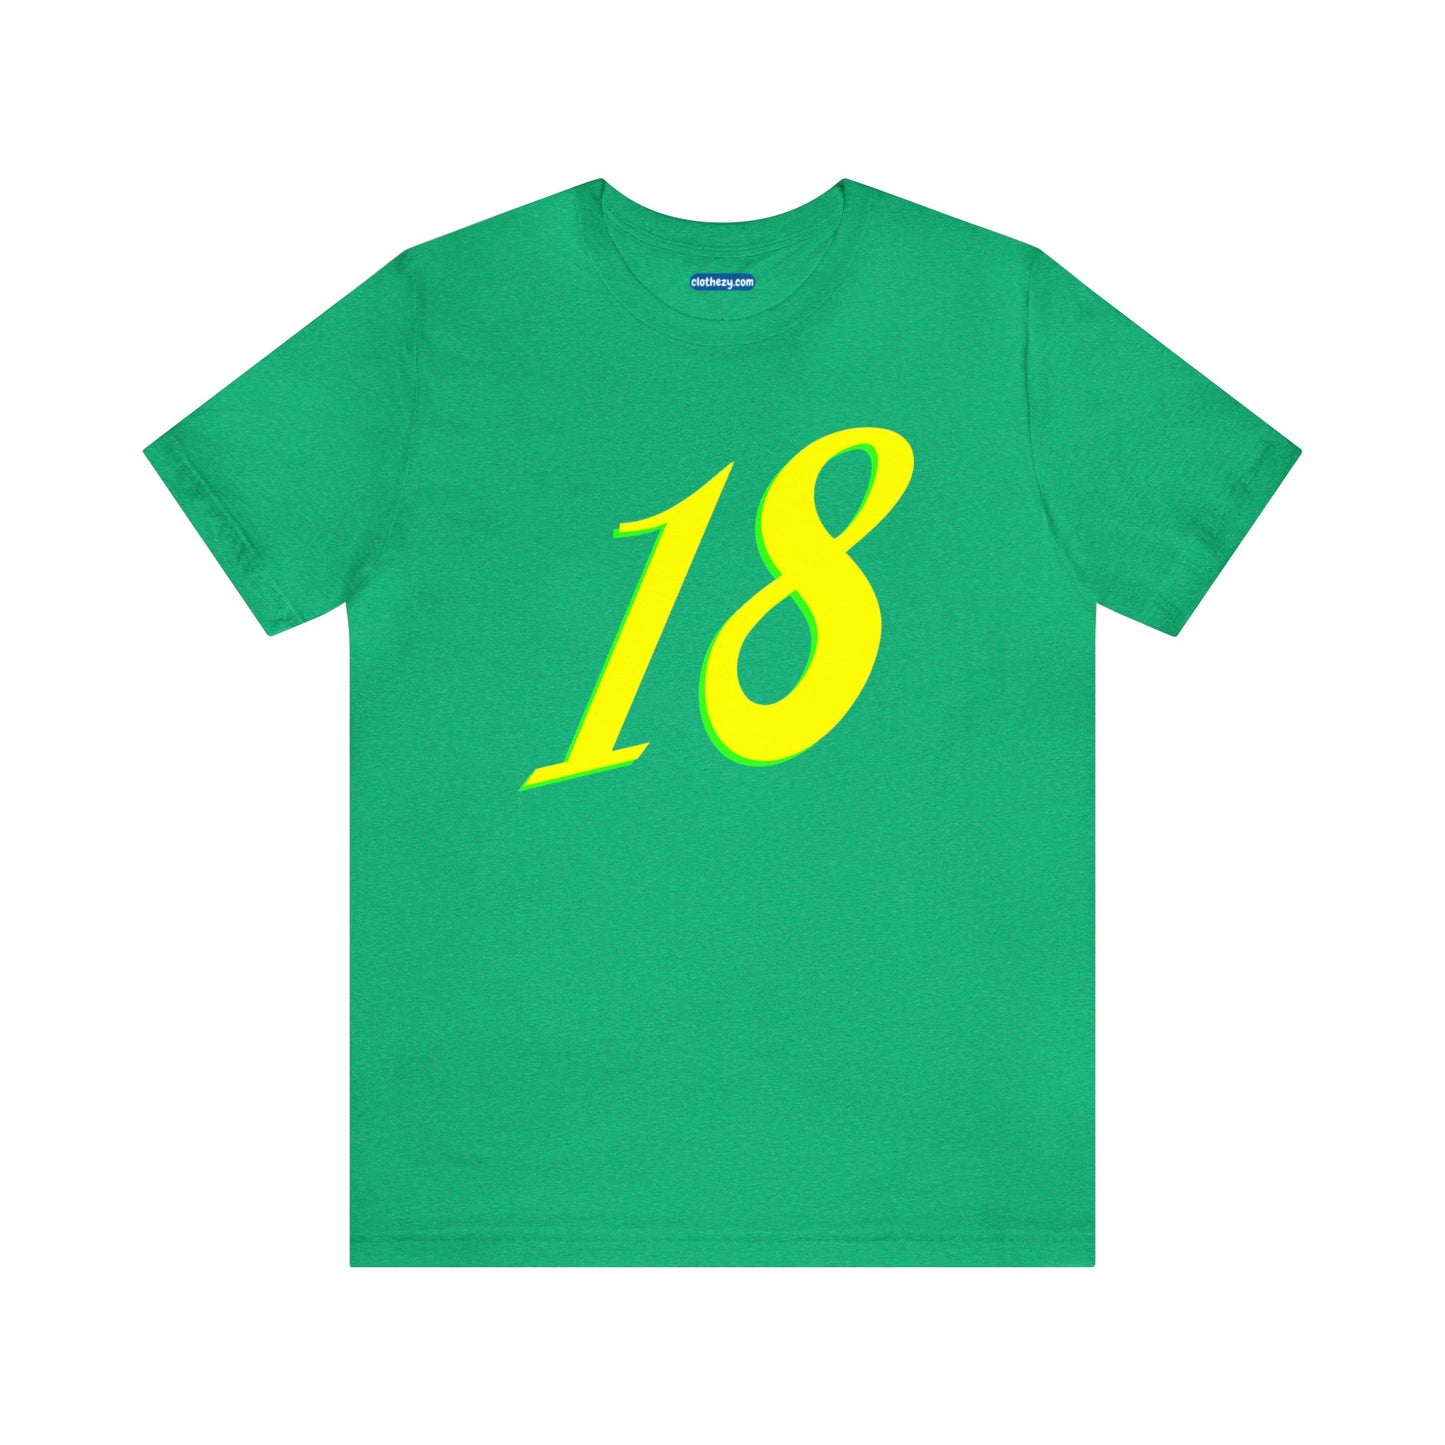 Number 18 Design - Soft Cotton Tee for birthdays and celebrations, Gift for friends and family, Multiple Options by clothezy.com in Green Heather Size Small - Buy Now